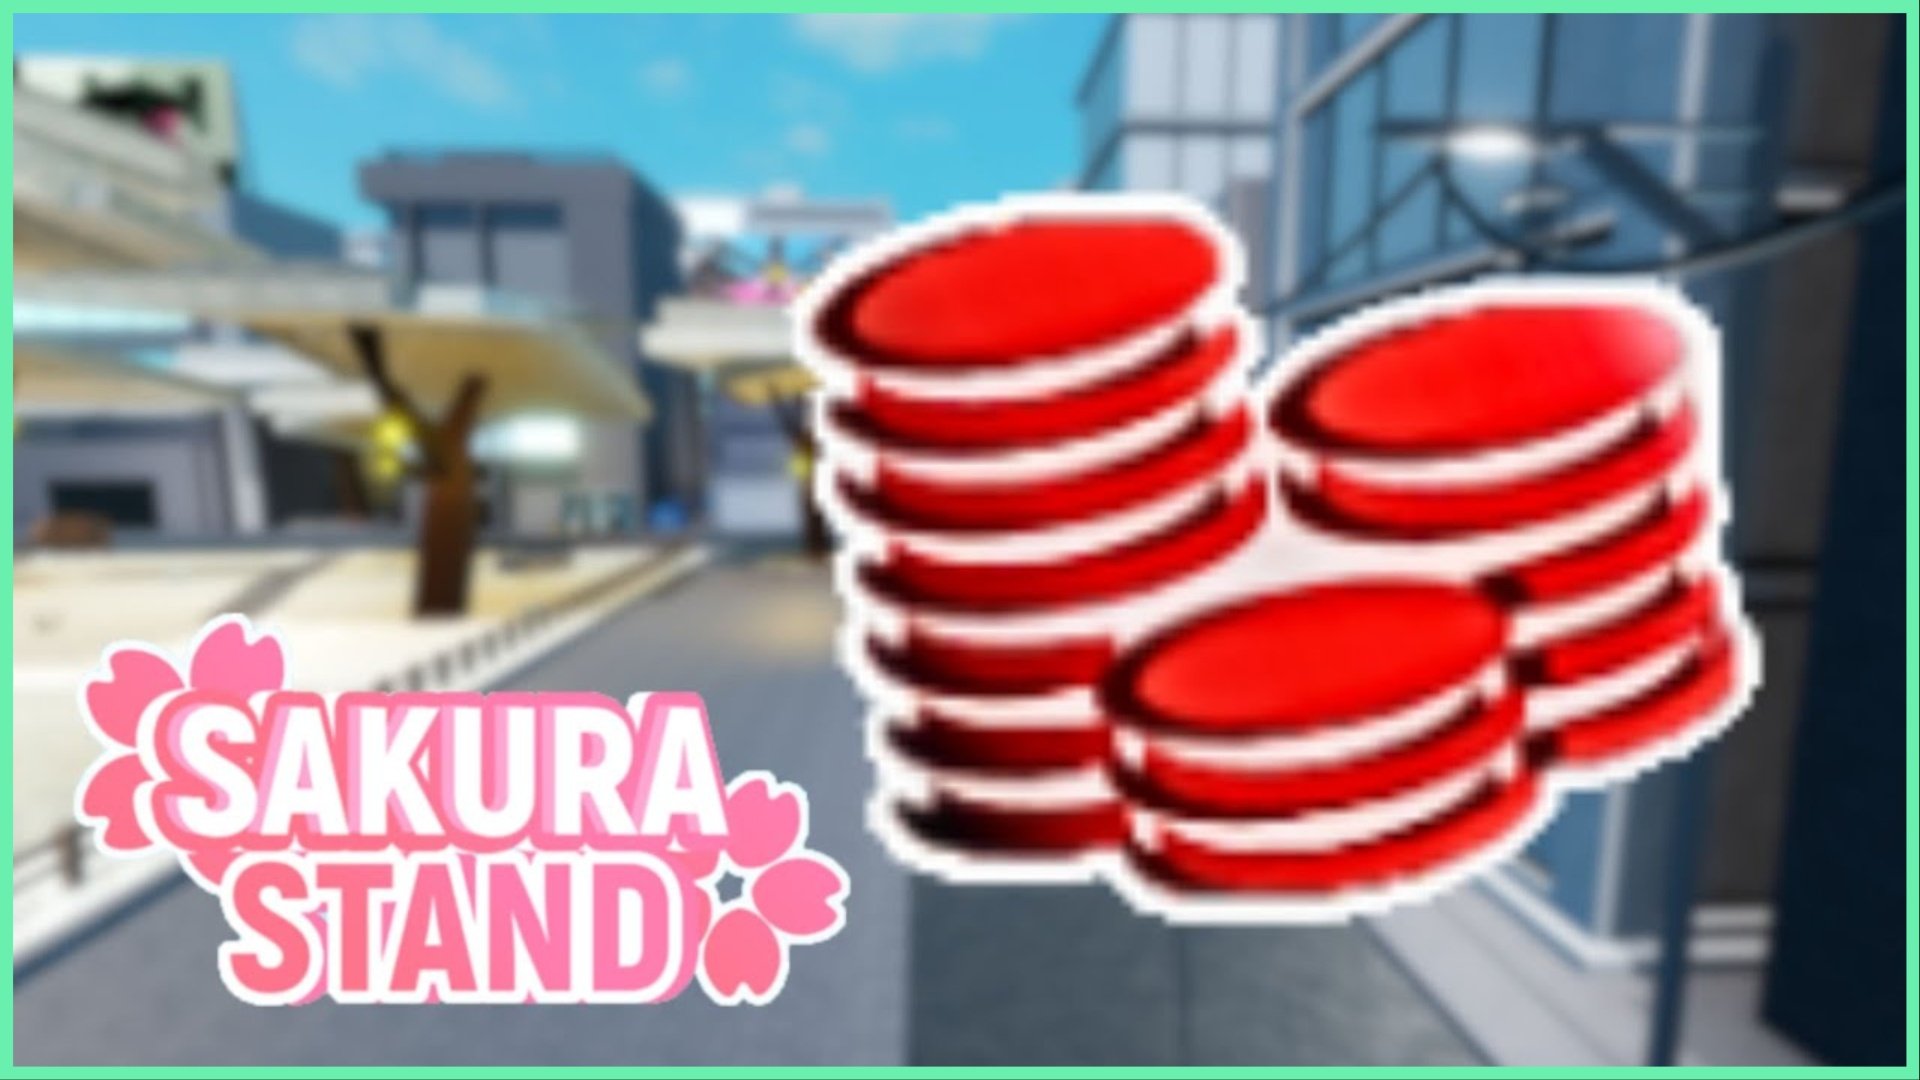 the image shows a stack of red tokens on the right hand side which is on top of a blurred neighbourhood like background. the Sakura Stand logo is in the bottom left